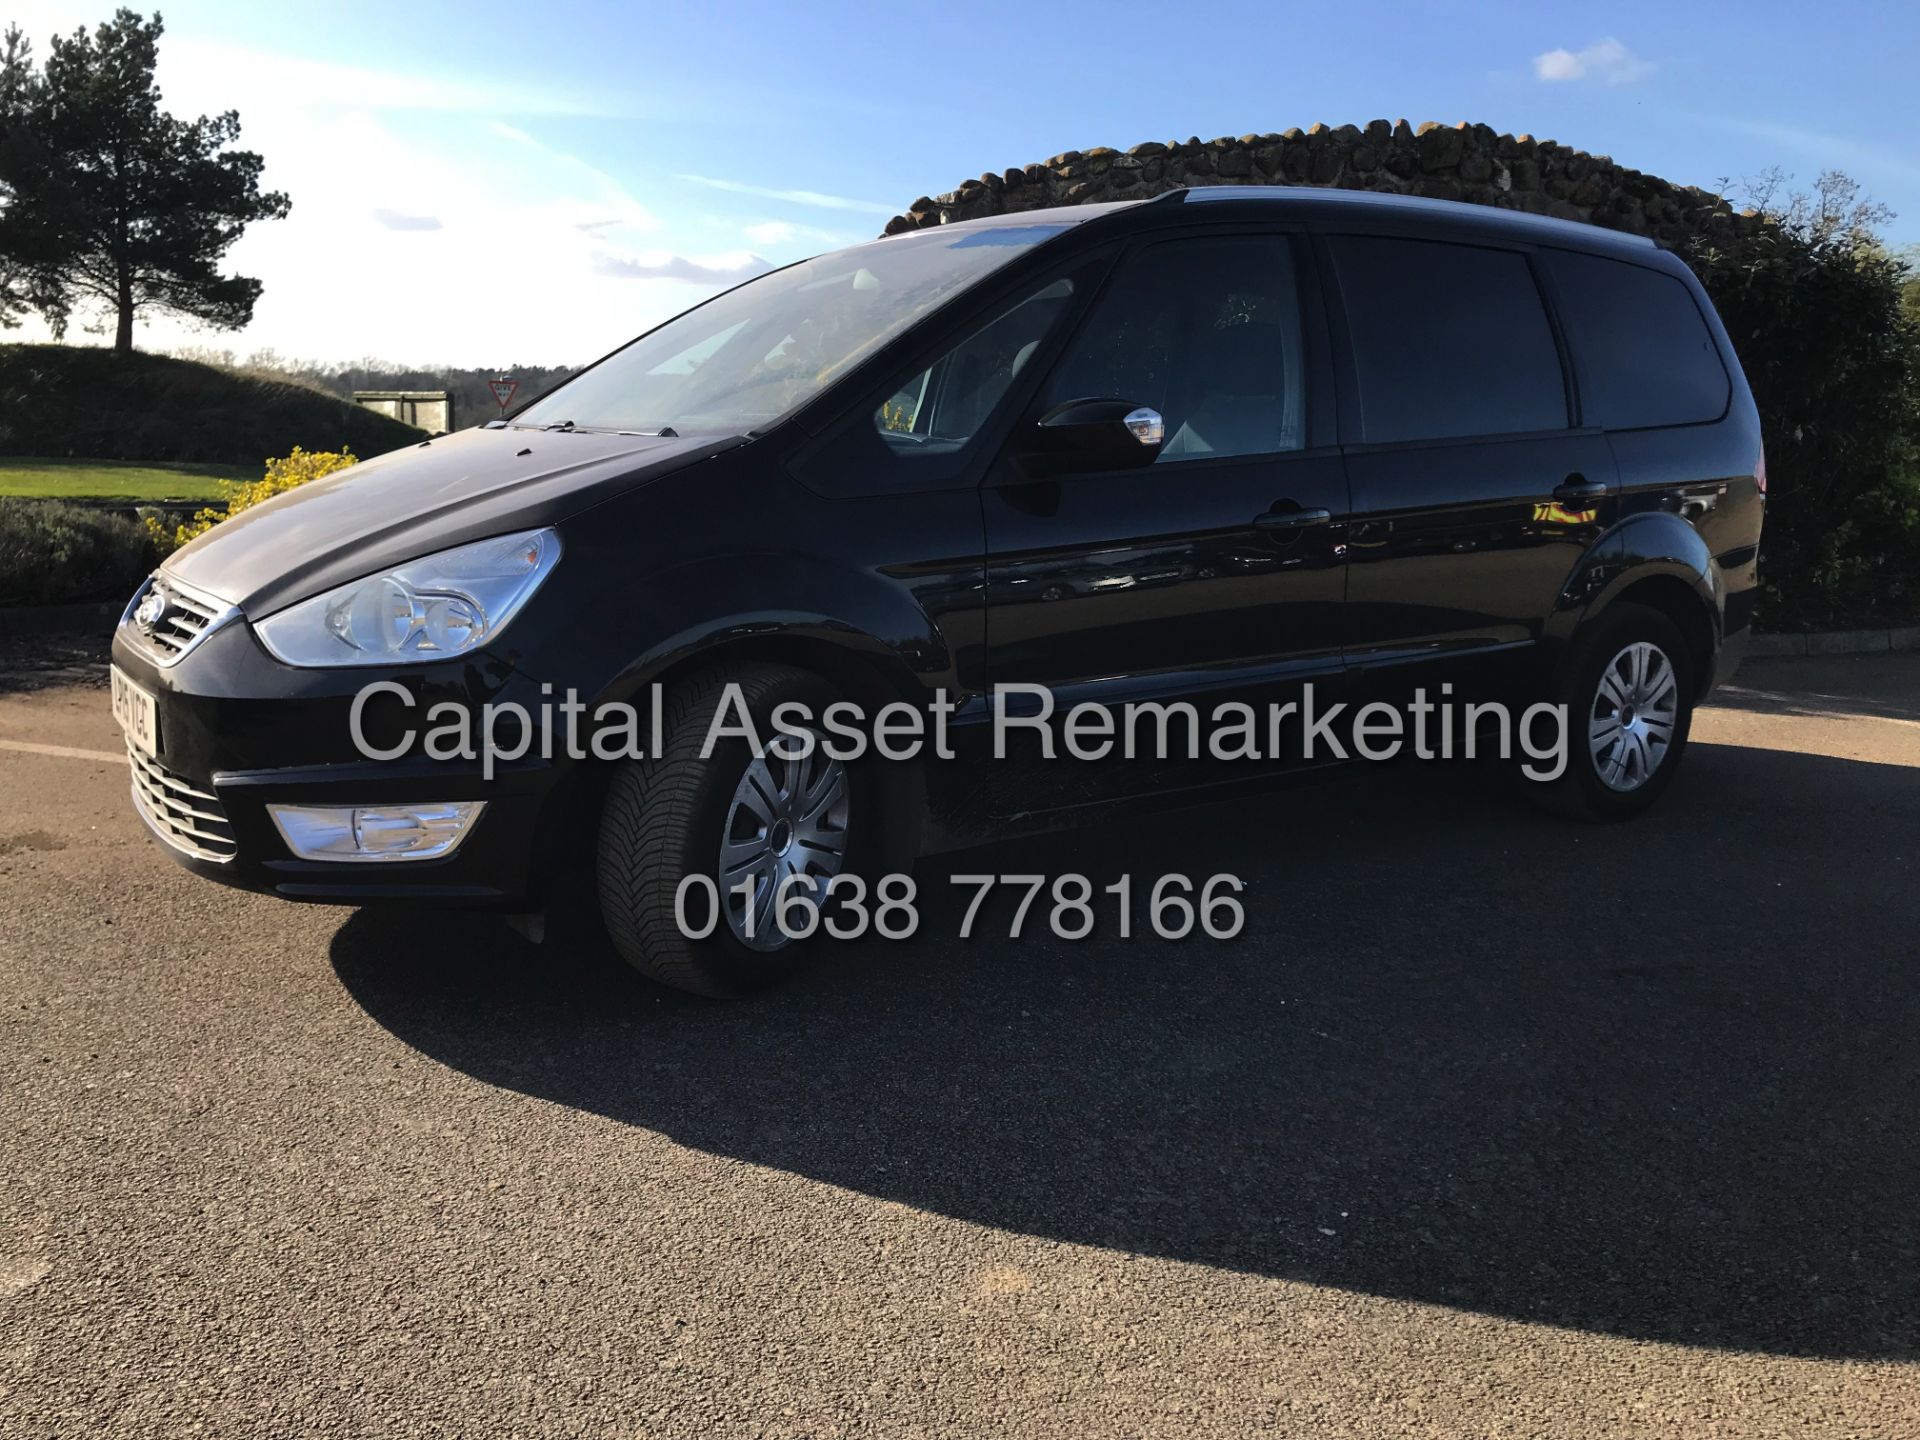 On Sale FORD GALAXY 2.0TDCI "POWER-SHIFT" 7 SEATER (15 REG) 1 OWNER - 140BHP - AIR CON - ELEC PACK